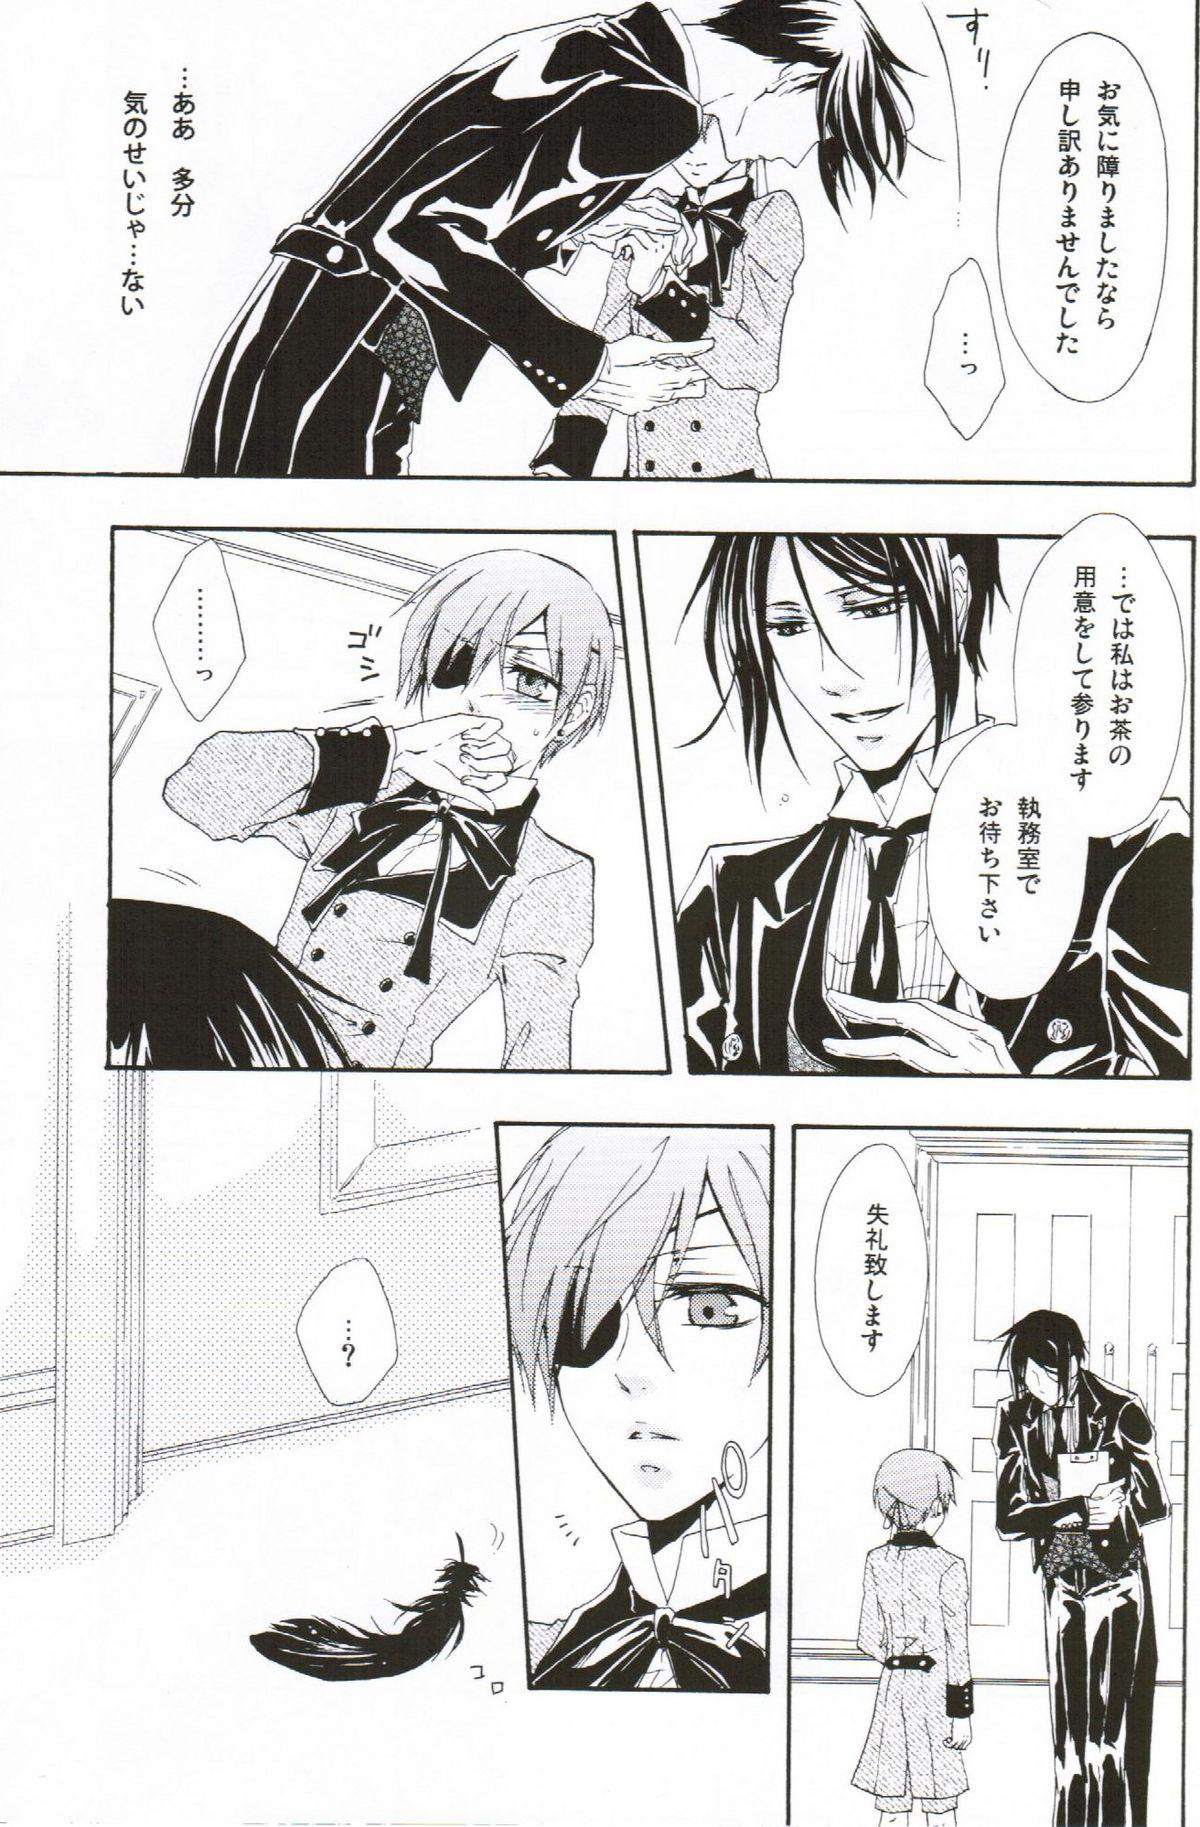 Solo My Little Bird - Black butler Creampies - Page 9